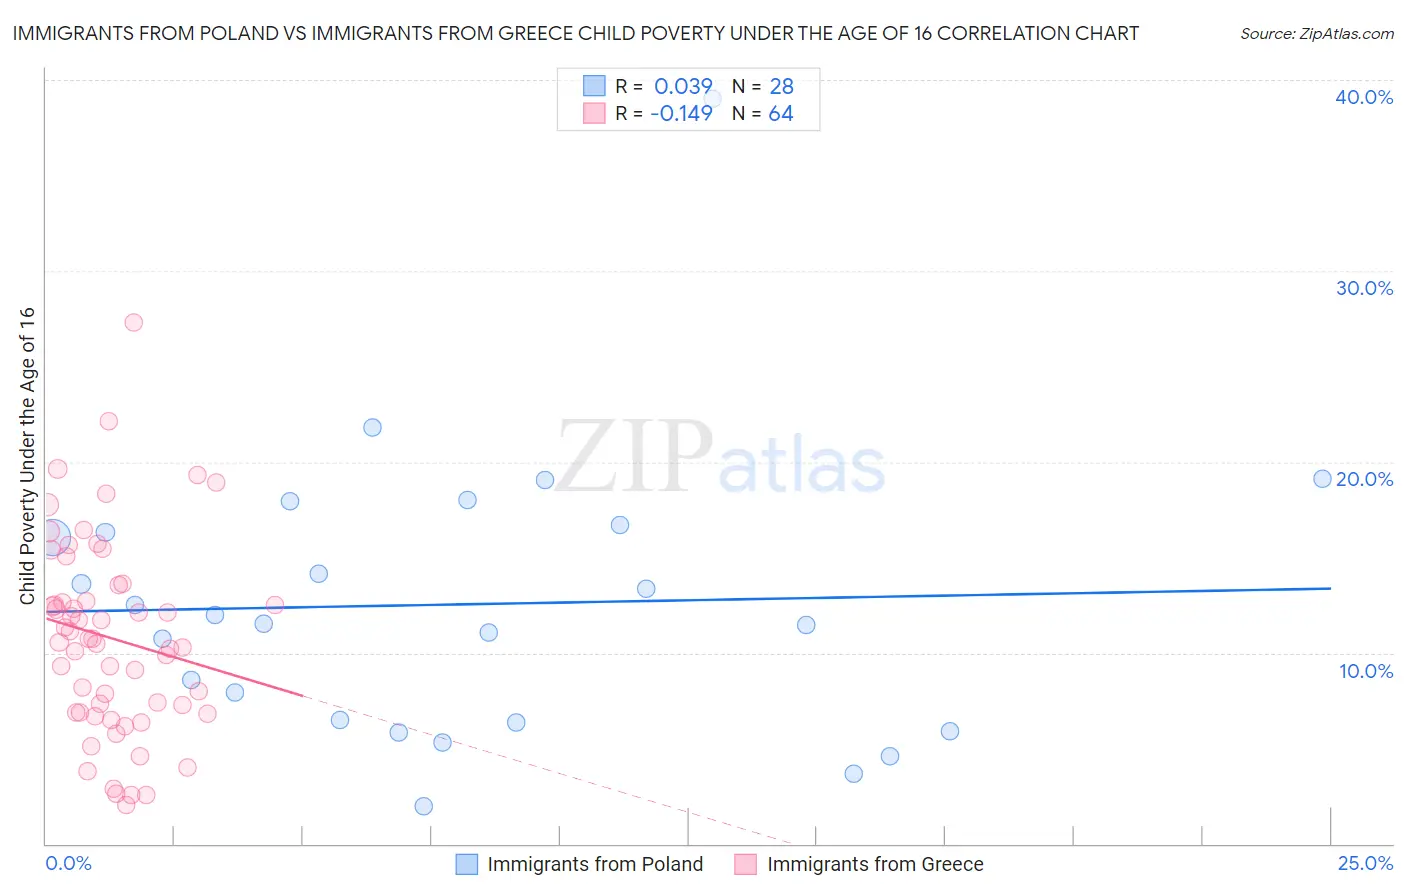 Immigrants from Poland vs Immigrants from Greece Child Poverty Under the Age of 16